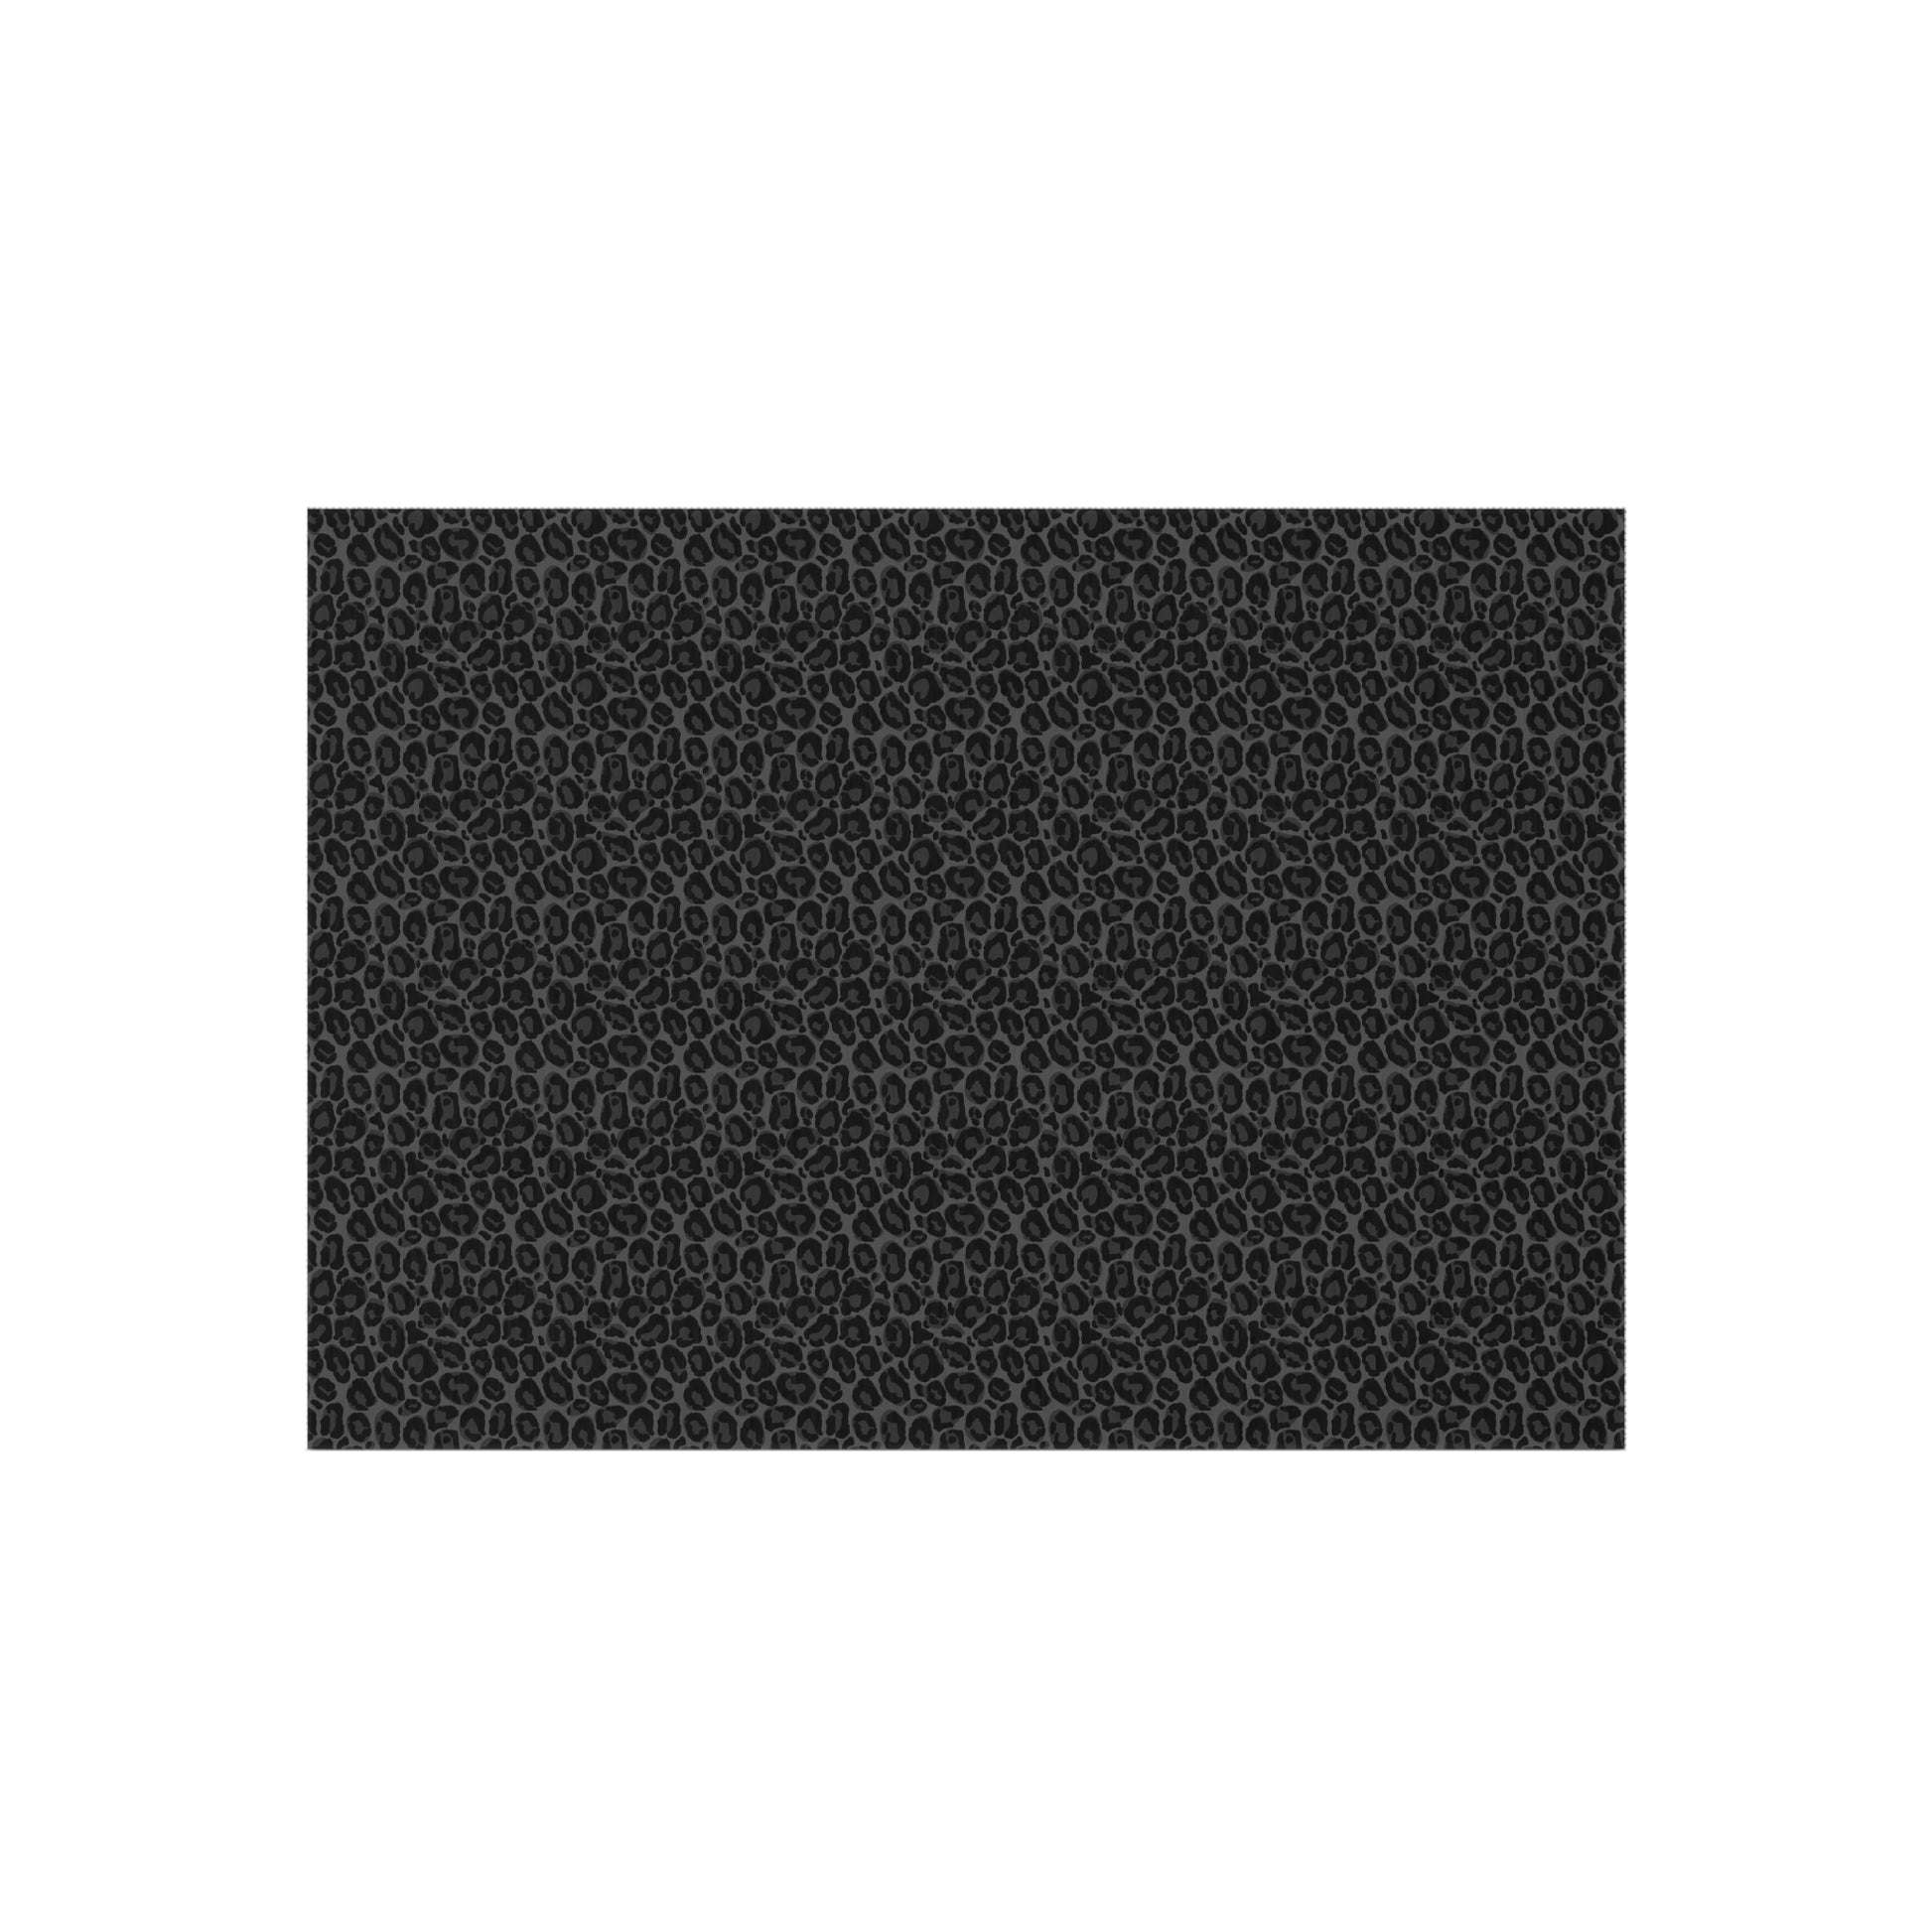 Black Leopard Outdoor Area Rug, Animal Print Waterproof Carpet Home Floor Decor Large 2x3 4x6 3x5 5x7 9x10 Patio Small Large Camping Mat Starcove Fashion